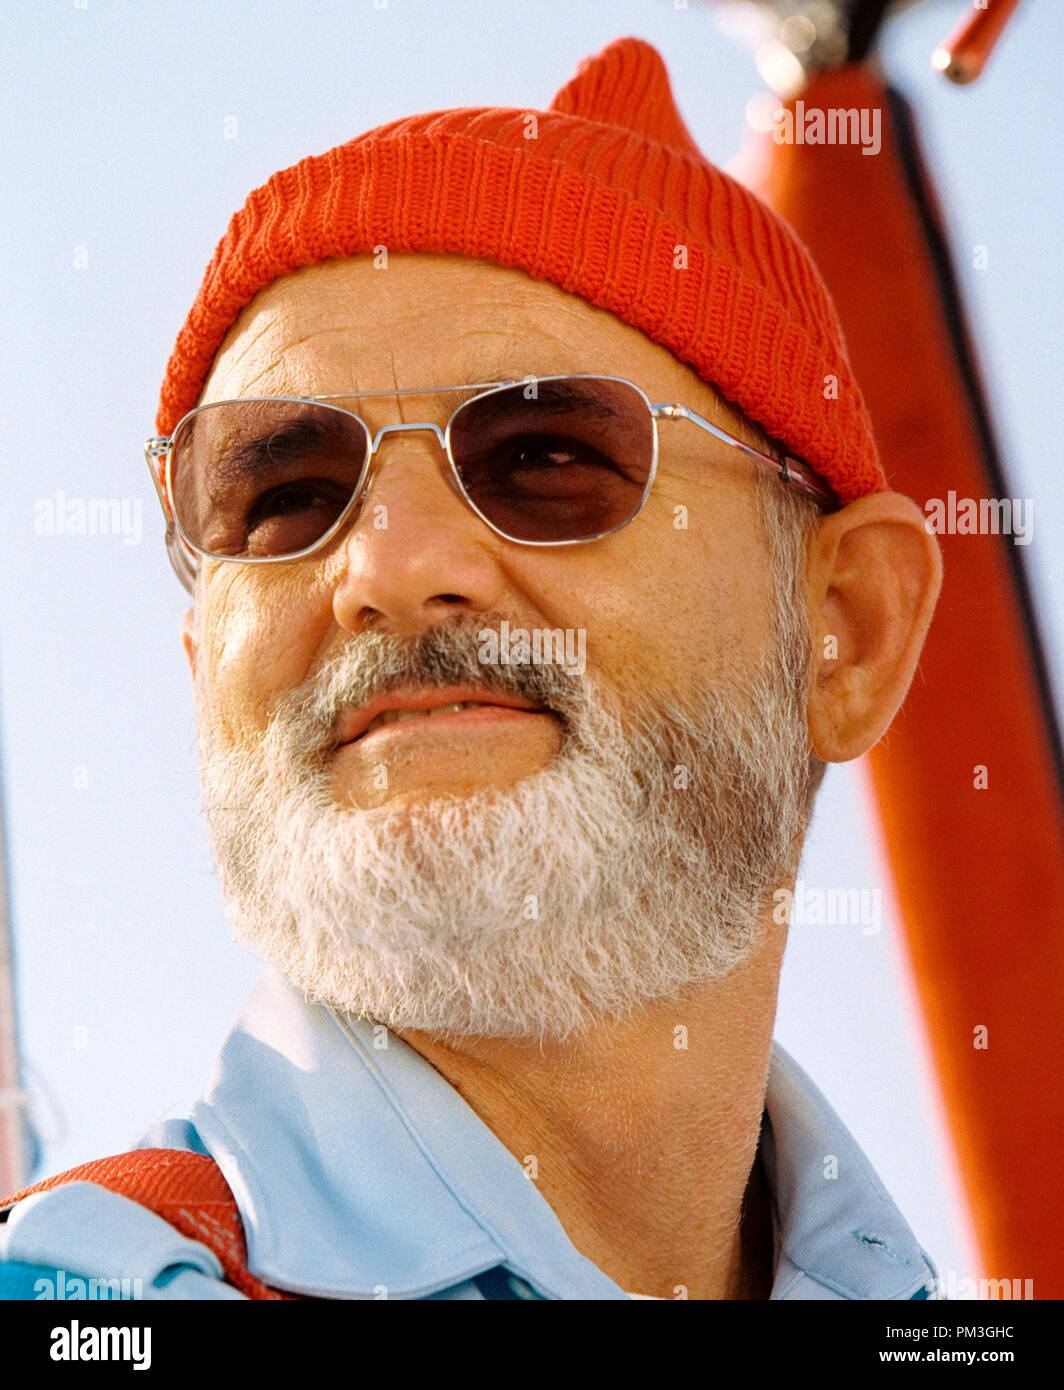 Film Still from 'The Life Aquatic with Steve Zissou' Bill Murray © 2004 Touchstone Pictures File Reference # 307351151THA  For Editorial Use Only -  All Rights Reserved Stock Photo